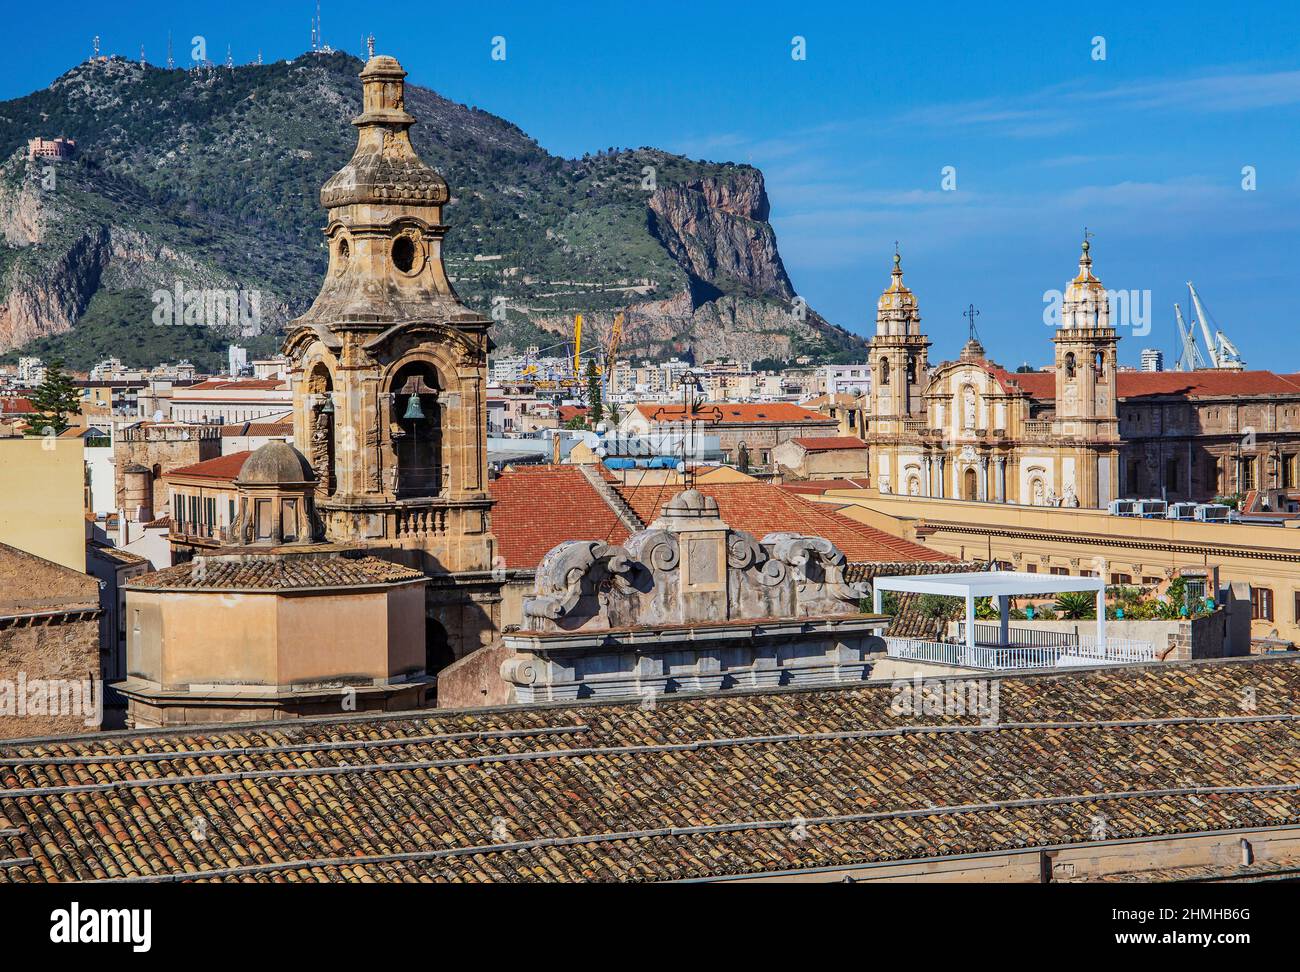 Old town roofs with church towers against Monte Pellegrino, Palermo, Sicily, Italy Stock Photo